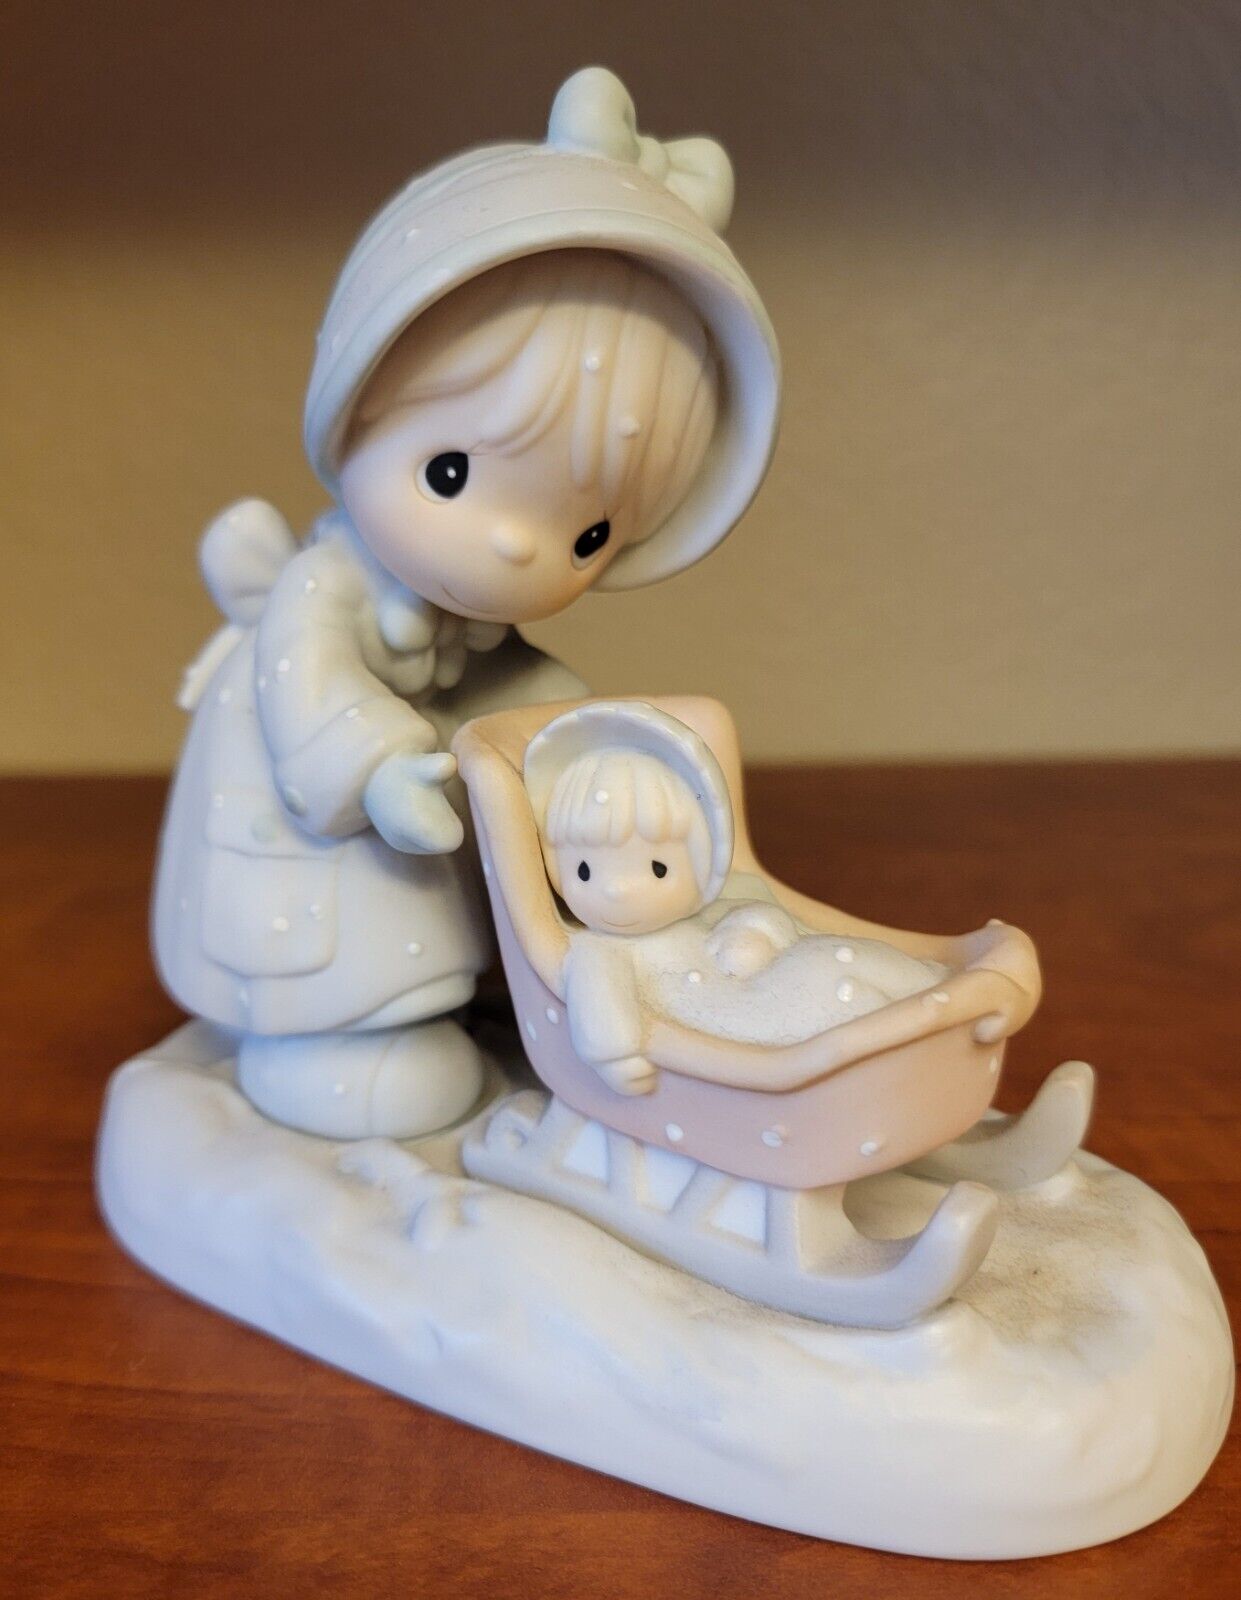 Precious Moments figurines - $10 for large and $5 for small